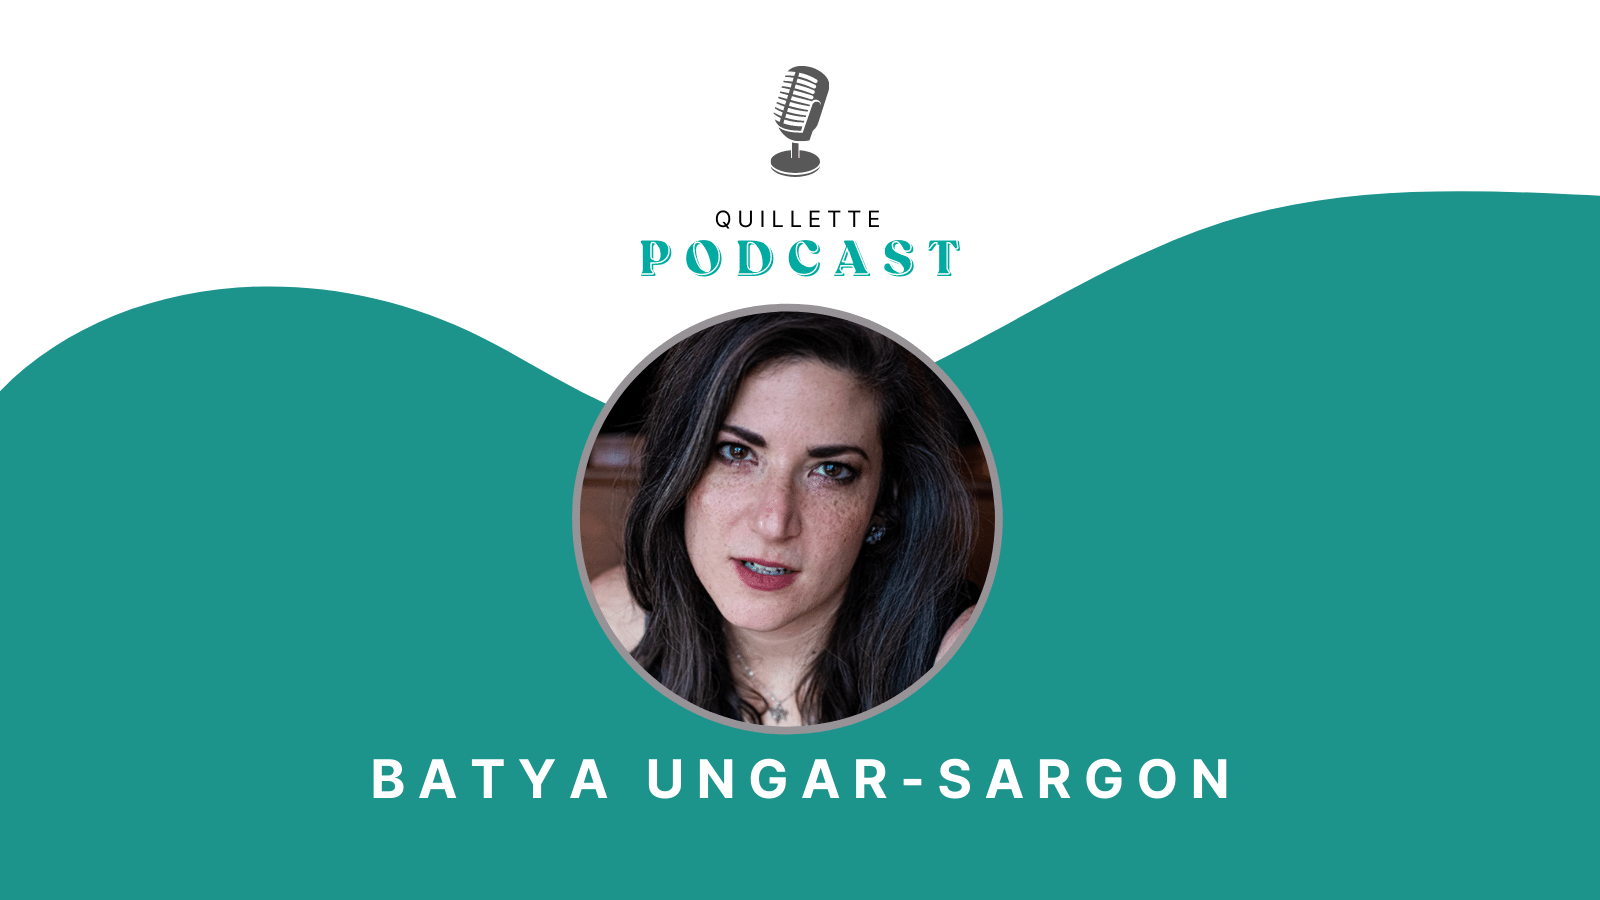 Podcast #173: Batya Ungar-Sargon on the Growing Gulf Between Ordinary Americans and the Progressive Journalists Who Cover Them